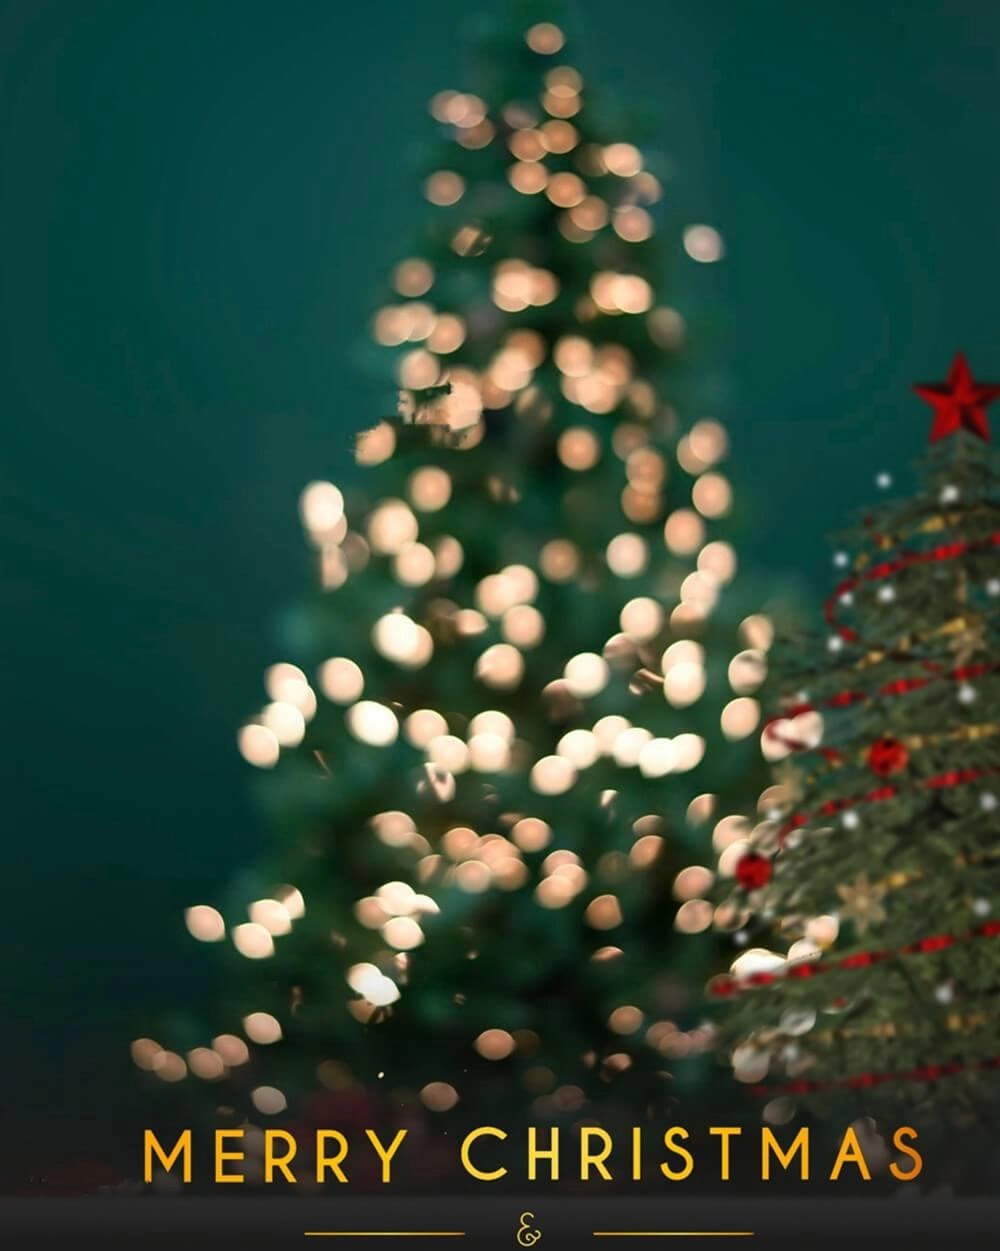 500+ Happy Christmas Editing Background Images | Christmas Background Images for Editing Download